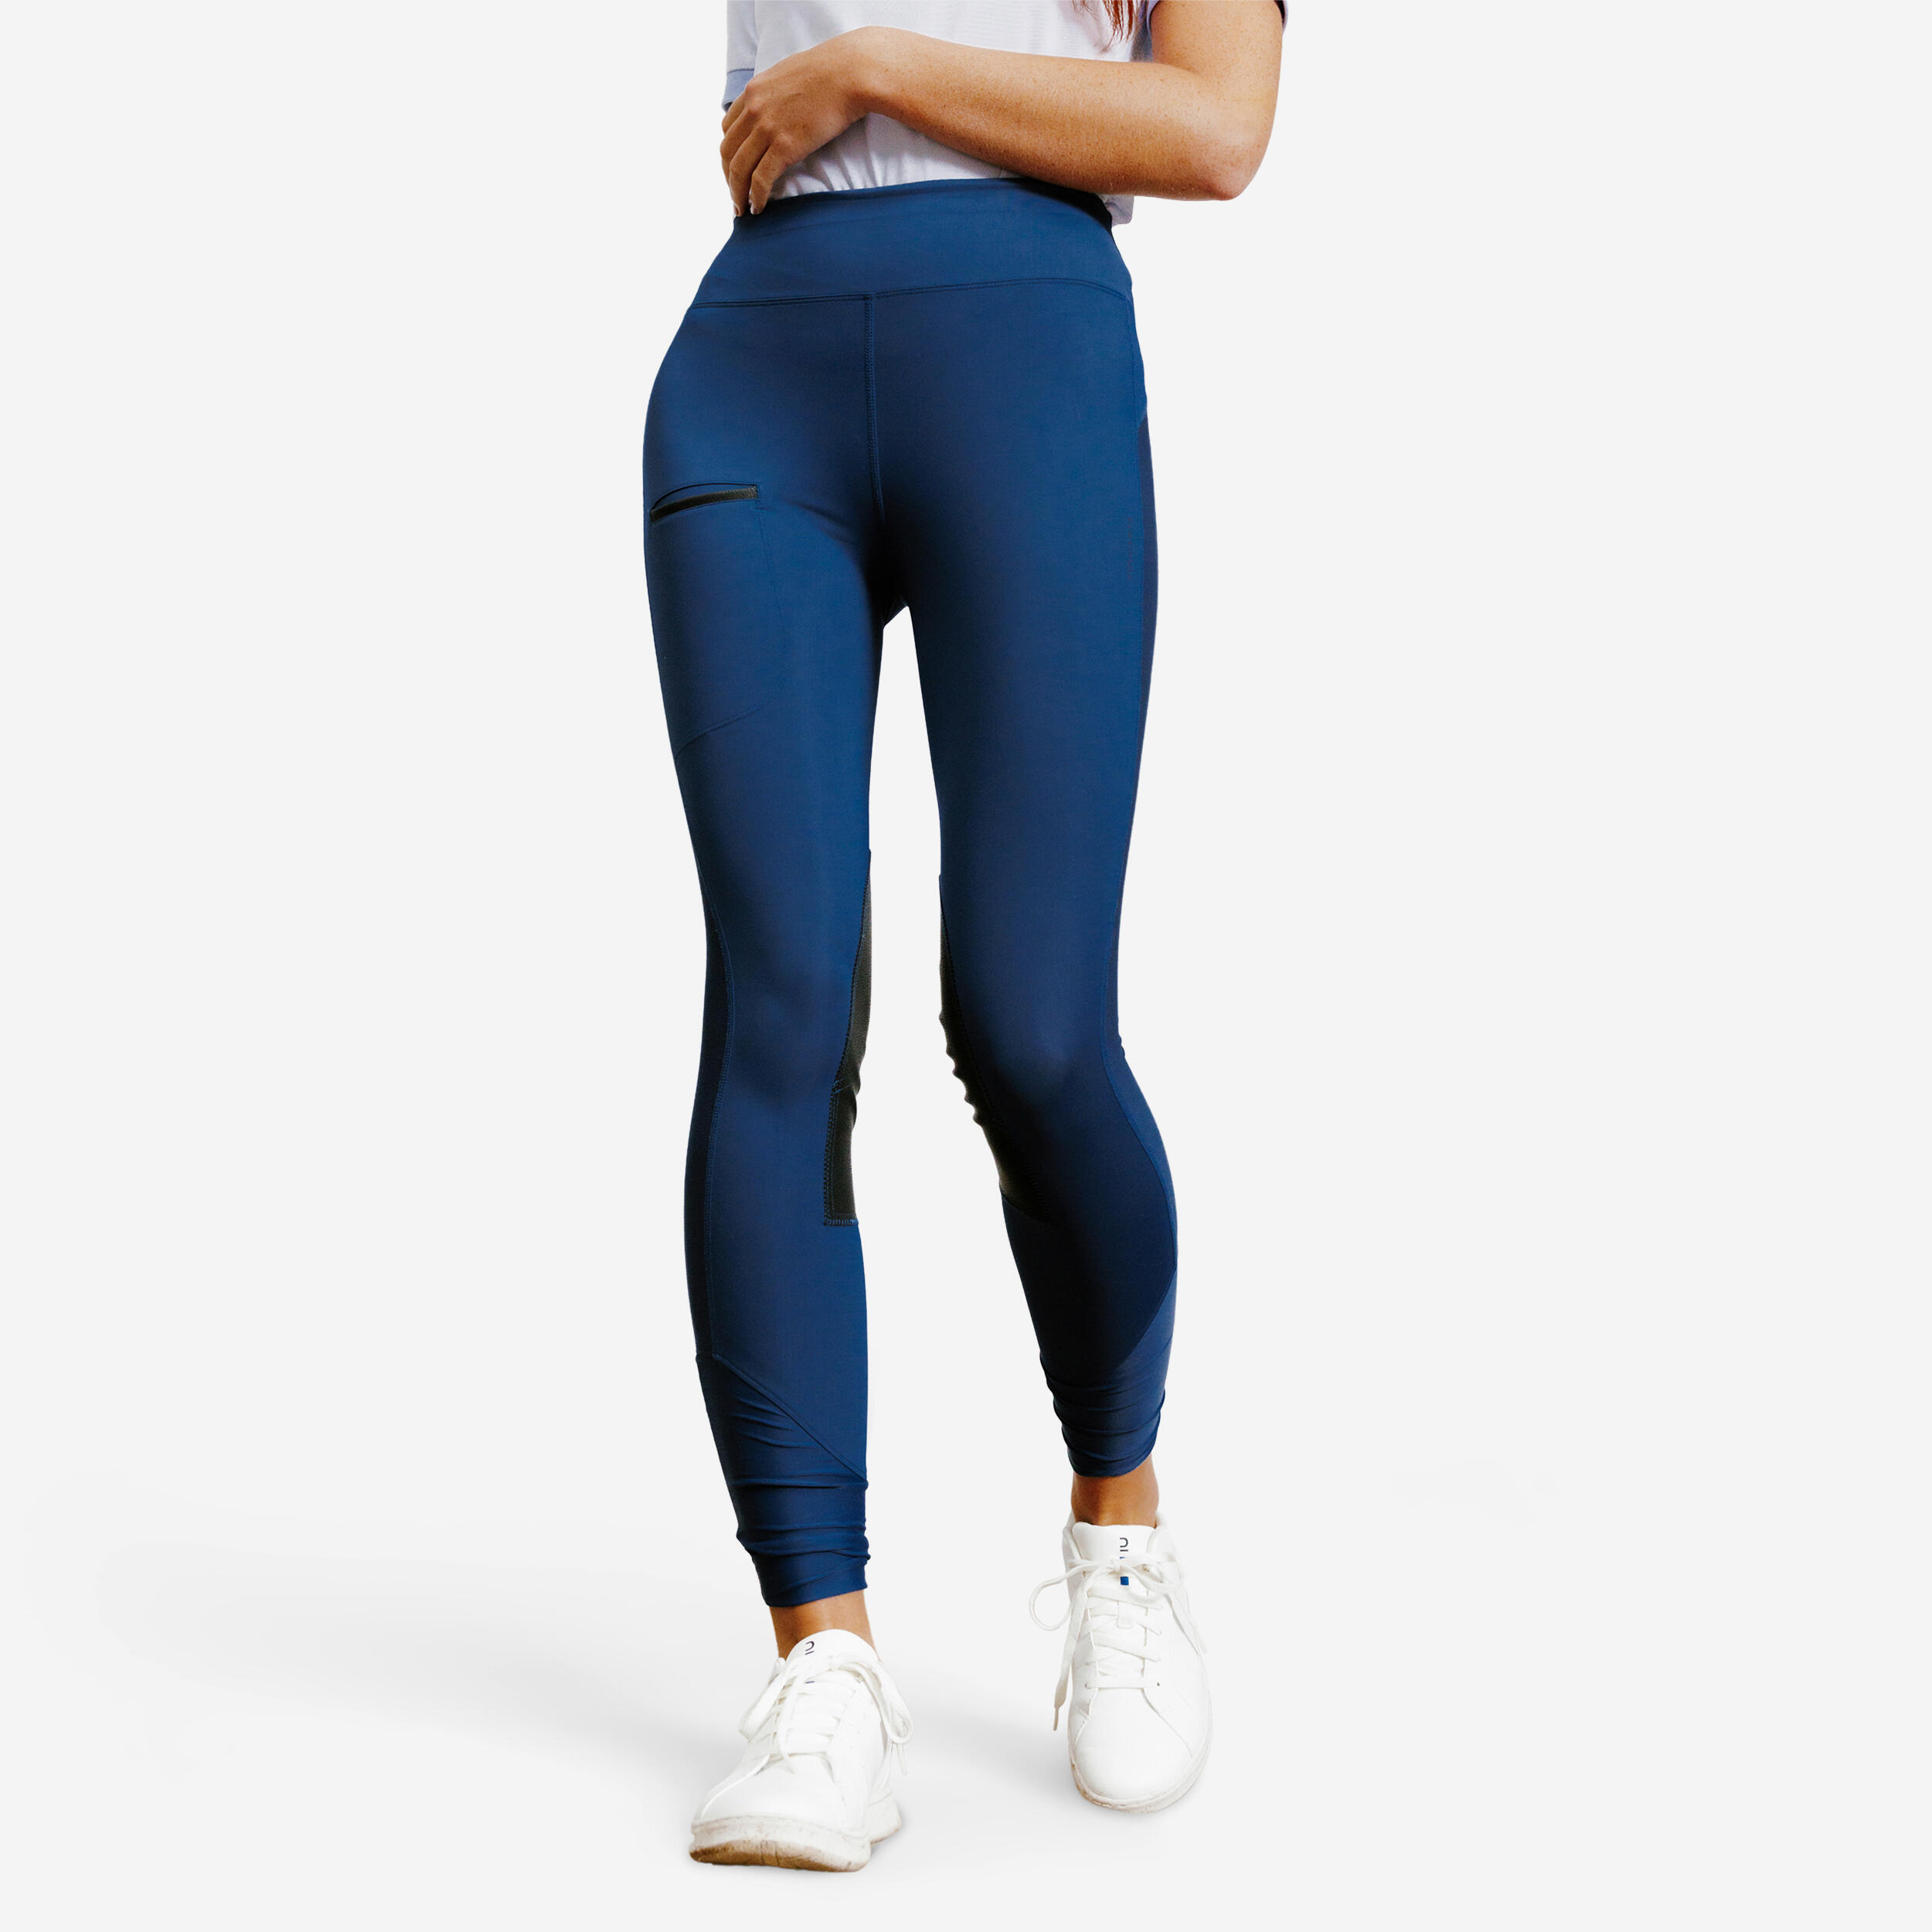 Womens Slim Fit Horse Riding Riding Leggings For Fitness And